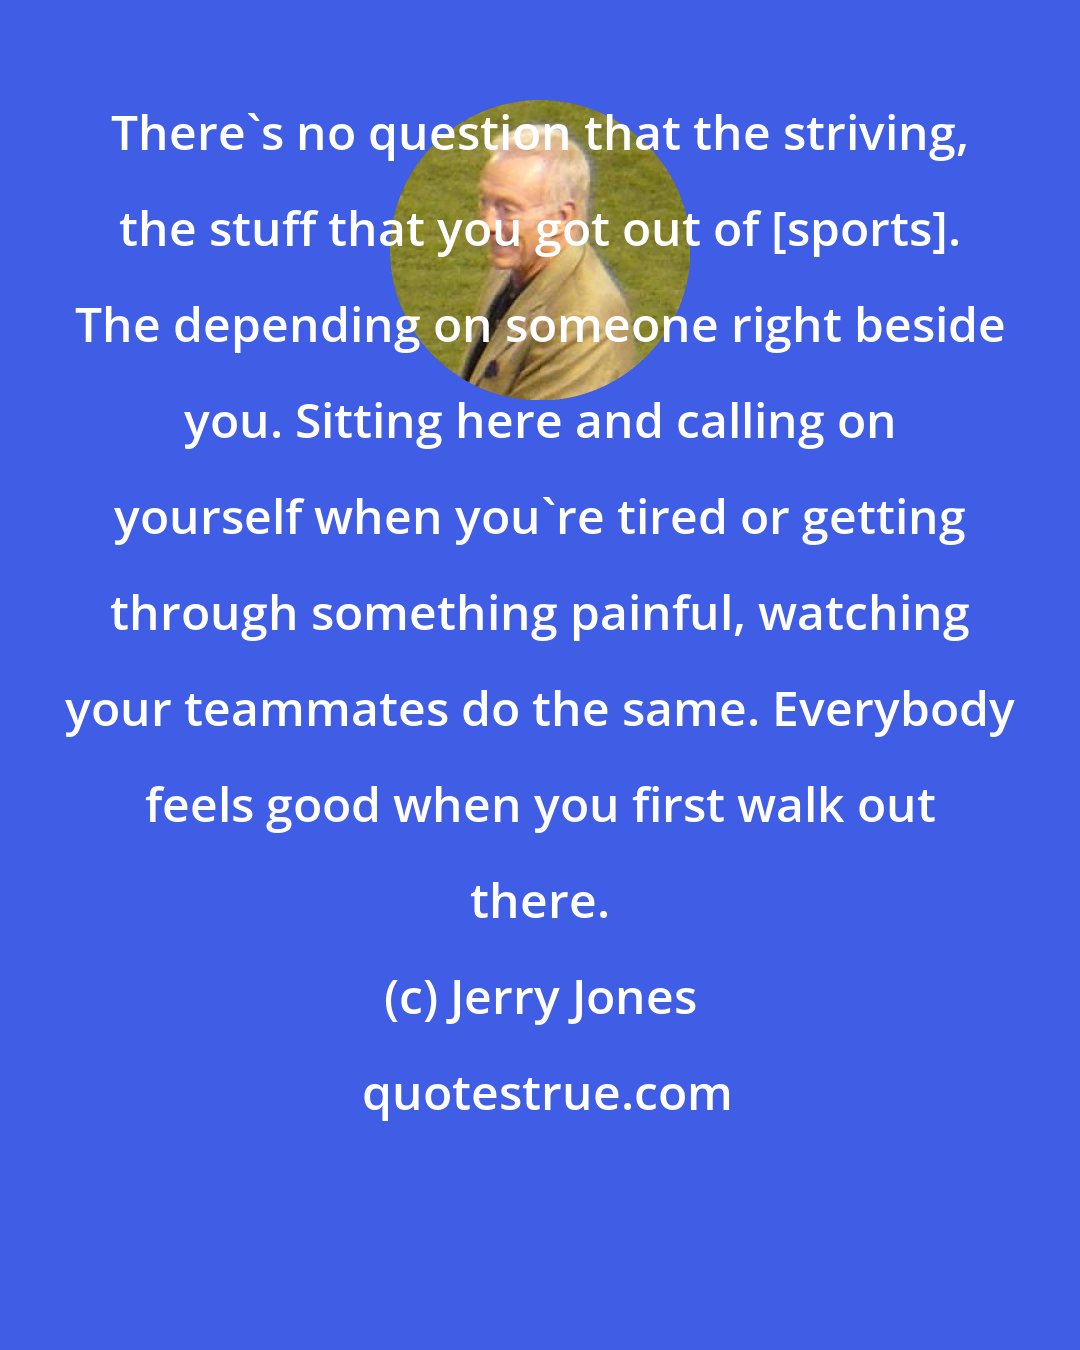 Jerry Jones: There's no question that the striving, the stuff that you got out of [sports]. The depending on someone right beside you. Sitting here and calling on yourself when you're tired or getting through something painful, watching your teammates do the same. Everybody feels good when you first walk out there.